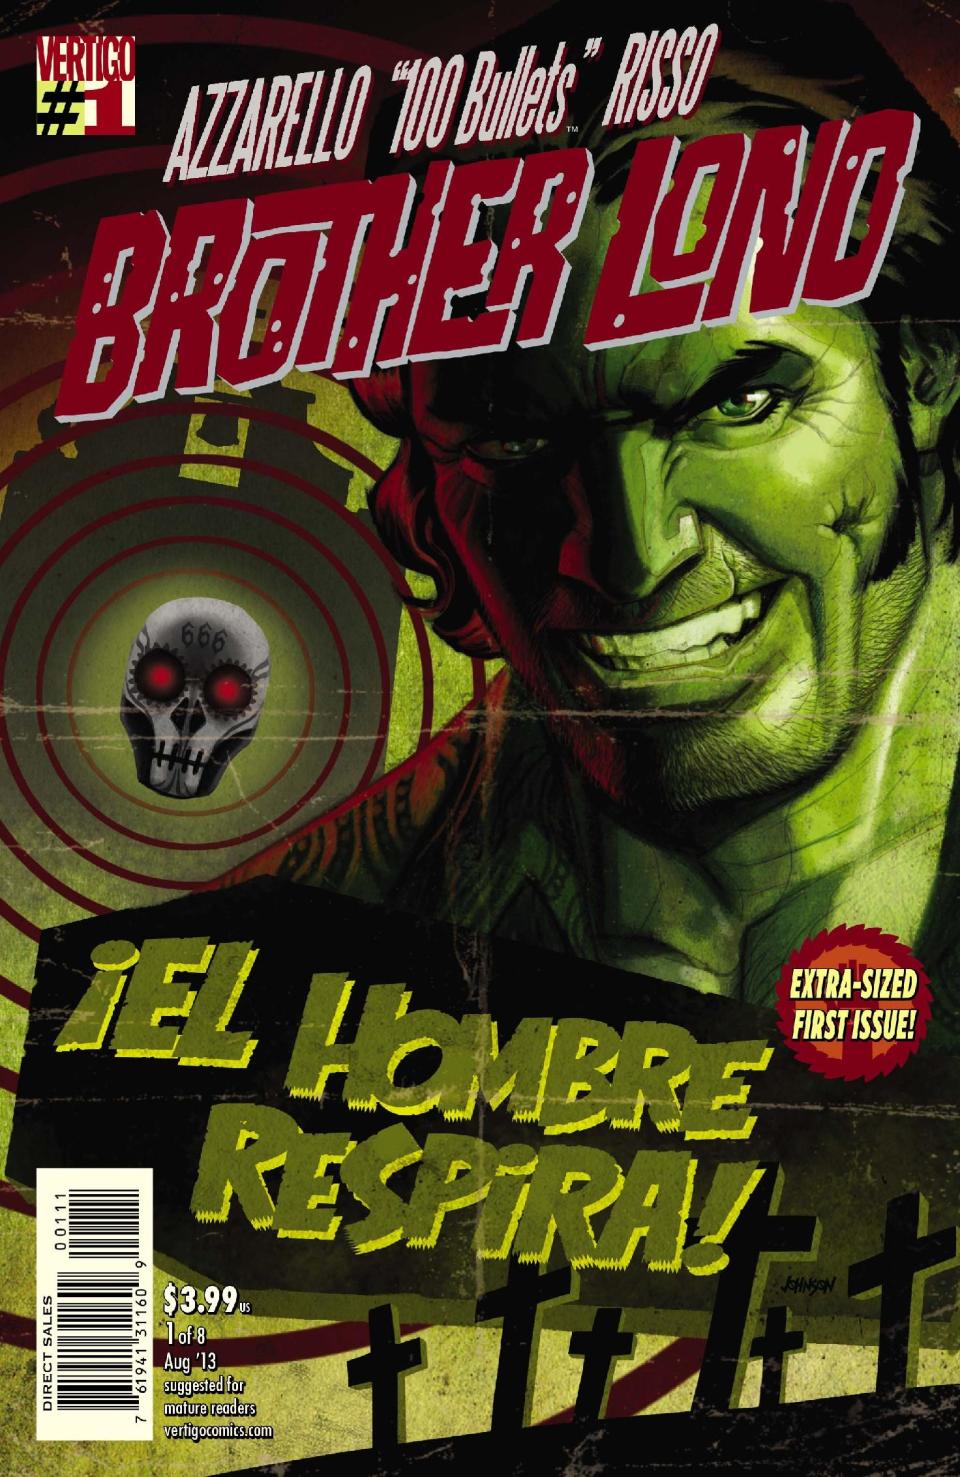 This photo provided by DC Entertainment shows the cover of "100 Bullets: Brother Lono." Vertigo Comics has long cultivated its reputation as home to the odd, unusual and unsettling. Being part of DC Entertainment, and by extension, Time Warner Inc., the opportunities for Vertigo Comics for expanding beyond the printed page are legion, a notion not lost on new executive editor Shelly Bond. Bond said the imprint, whose current and coming titles include Bill Willingham's "Fables," Scott Snyder's "The Wake," Brian Azzarello and Eduardo Risso's "100 Bullets: Brother Lono" and the upcoming graphic novel "Fairest: In All the Land" won't play it safe. (AP Photo/DC Entertainment)